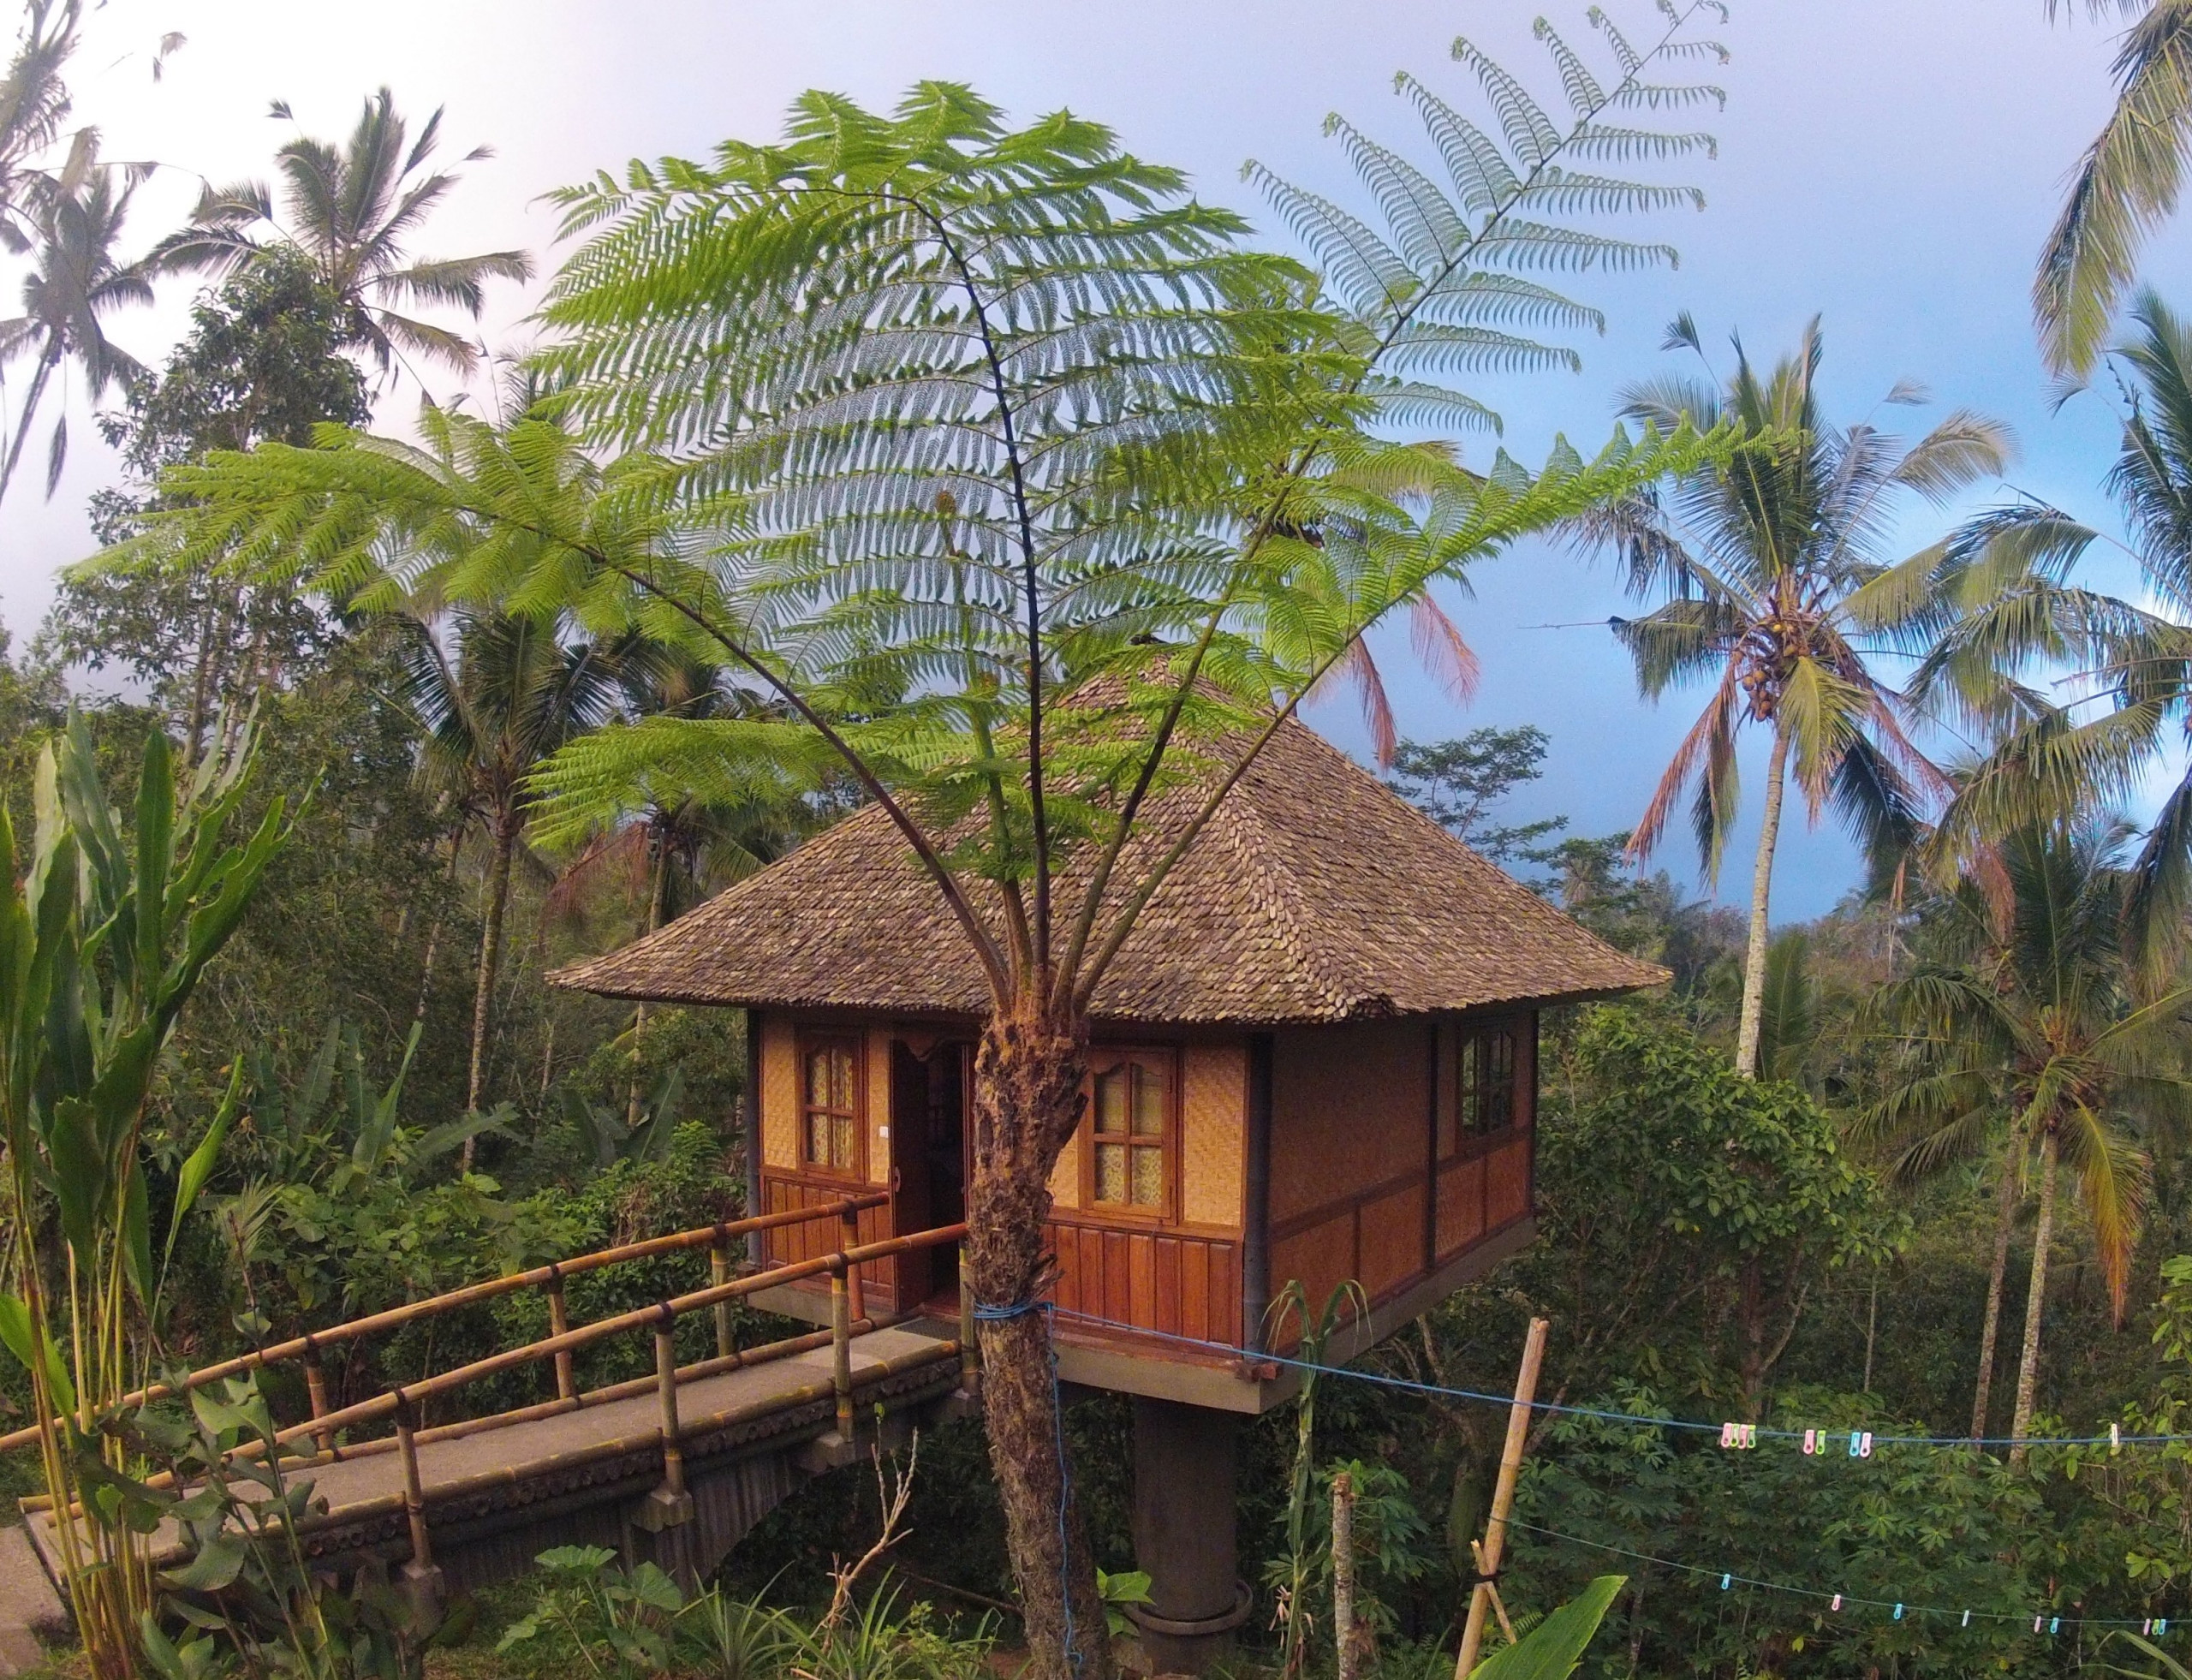 Owner's Home at the Sarinbuana Eco Lodge - Tropical - Shed - Other - by PT  Bali Greenworld | Houzz